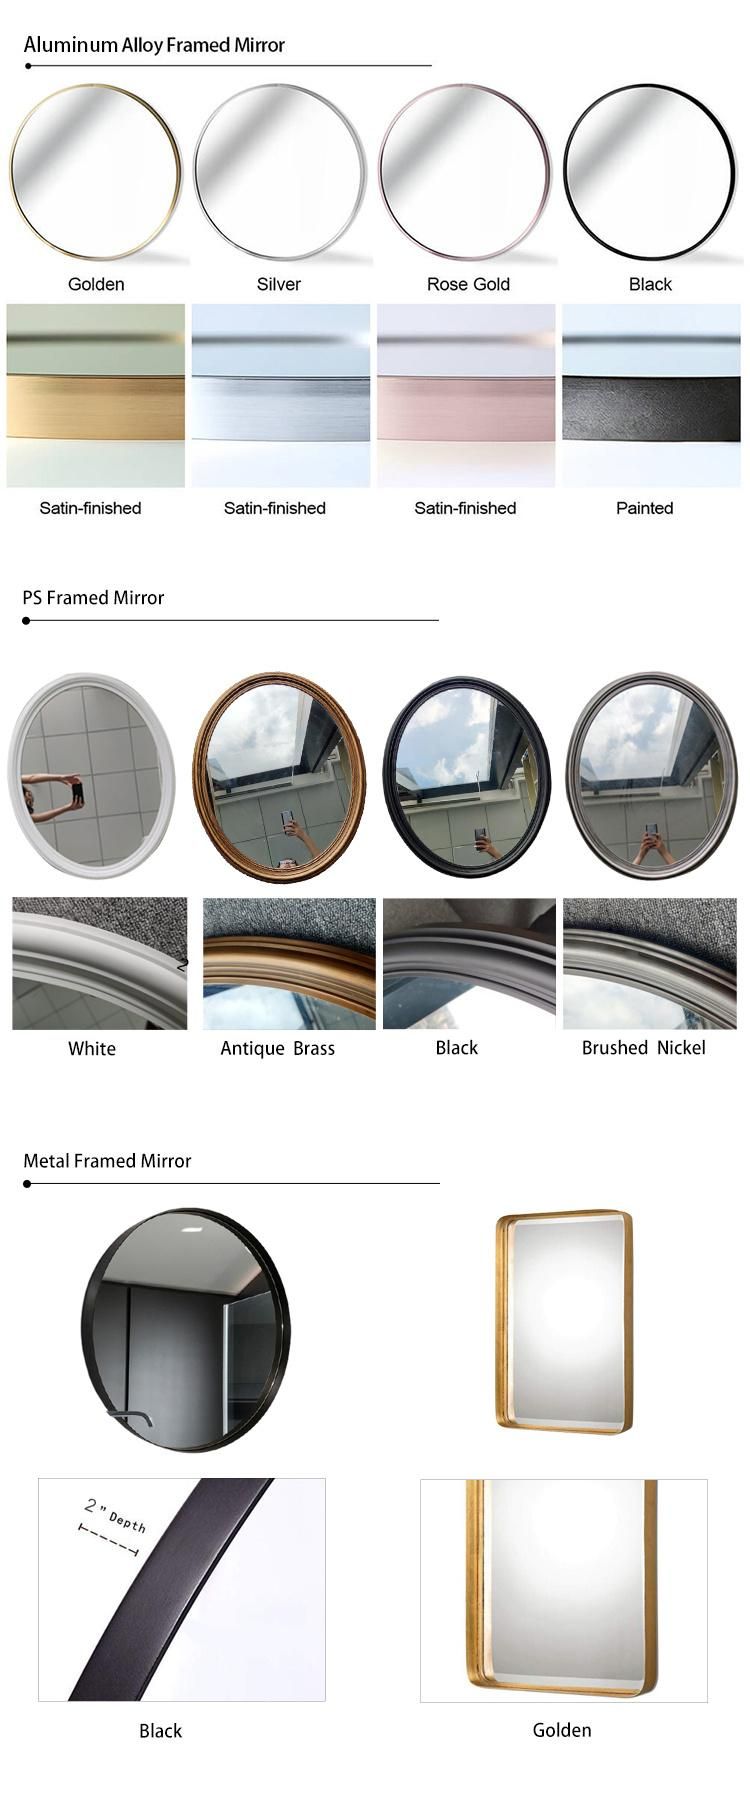 Wholesale Premium Quality Make-up Bathroom Mirror for Living Room, Bedroom with Low Price